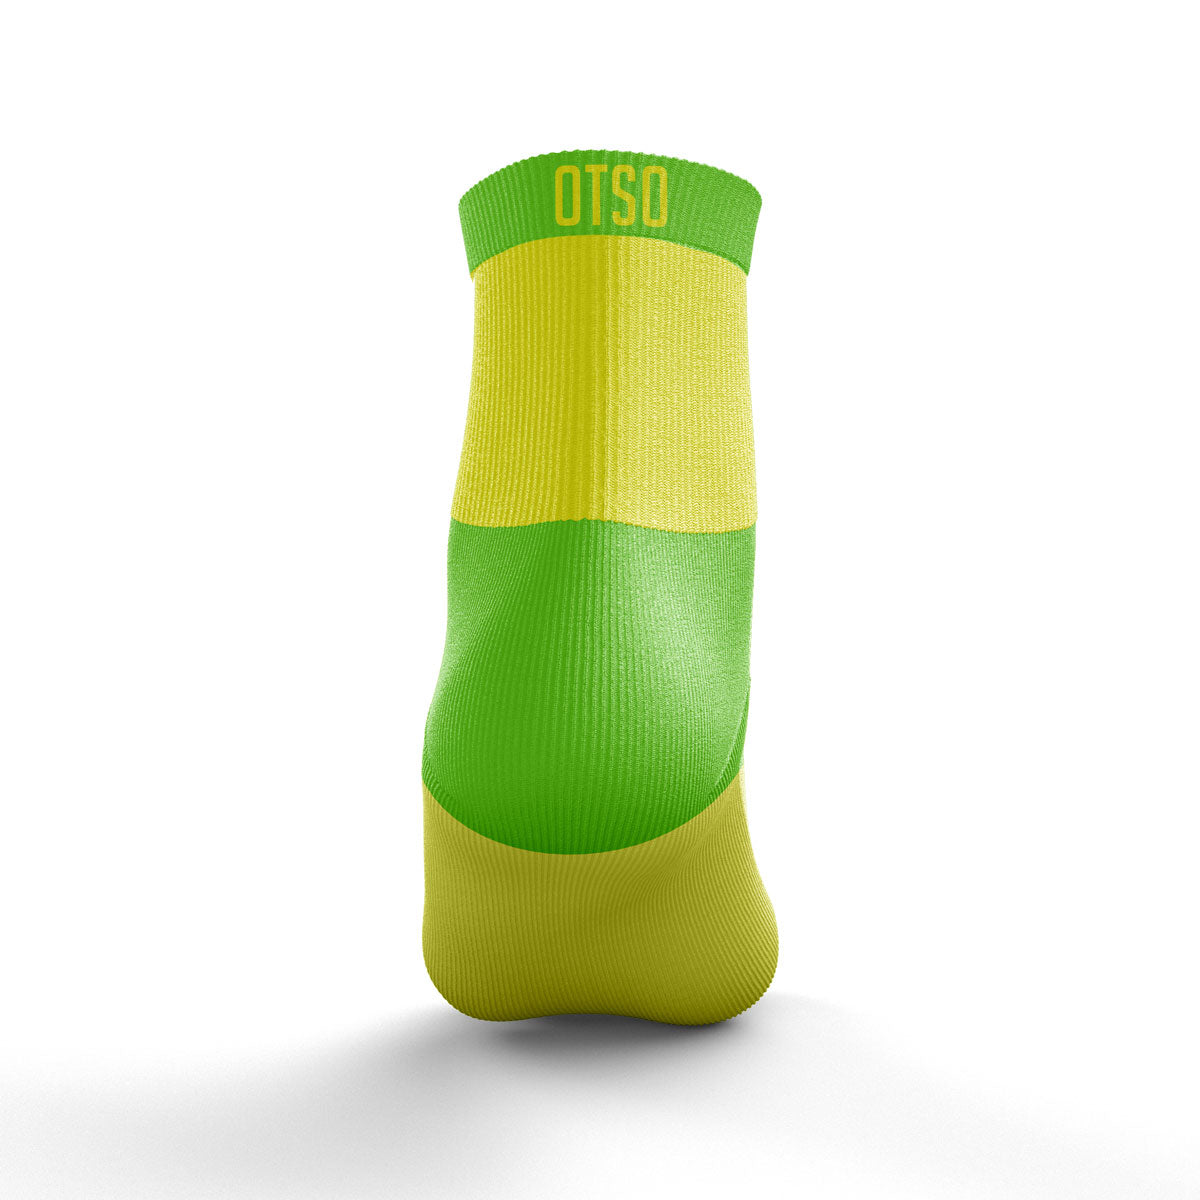 Chaussettes Multisport Low Cut - Fluo Yellow & Fluo Green (Outlet)